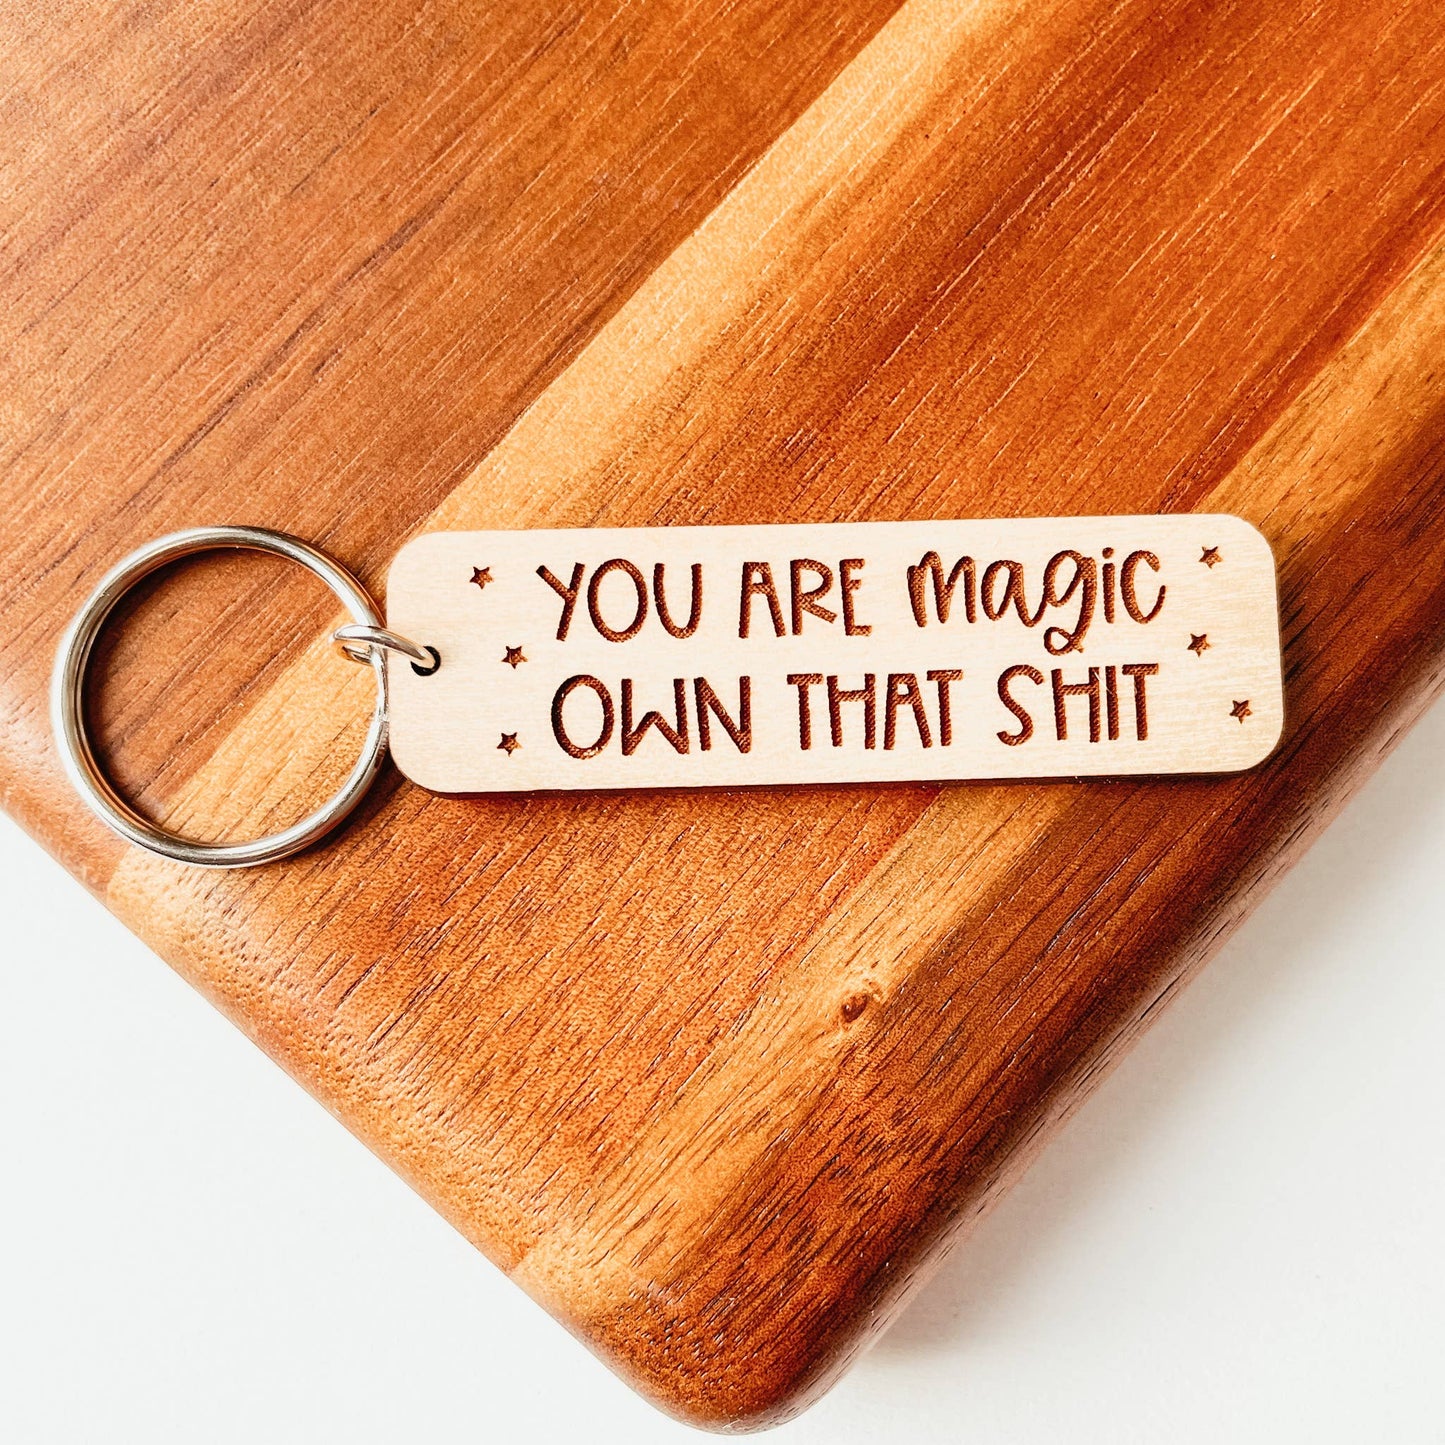 You Are Magic Own That Shit Keychain